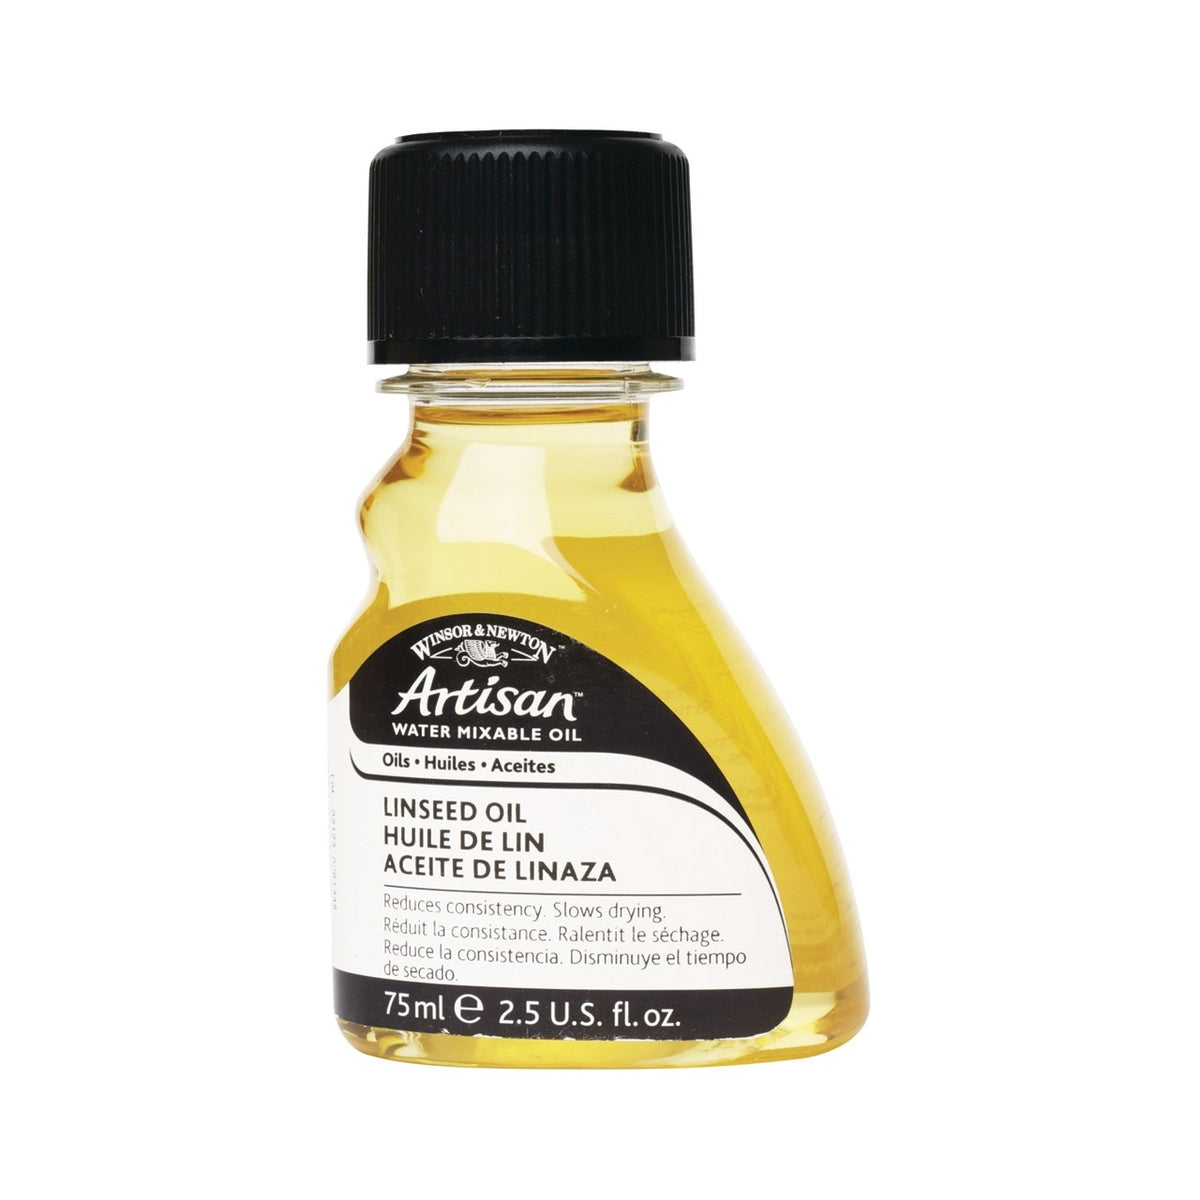 Winsor & Newton Artisan Water Mixable Linseed Oil 75ml - merriartist.com